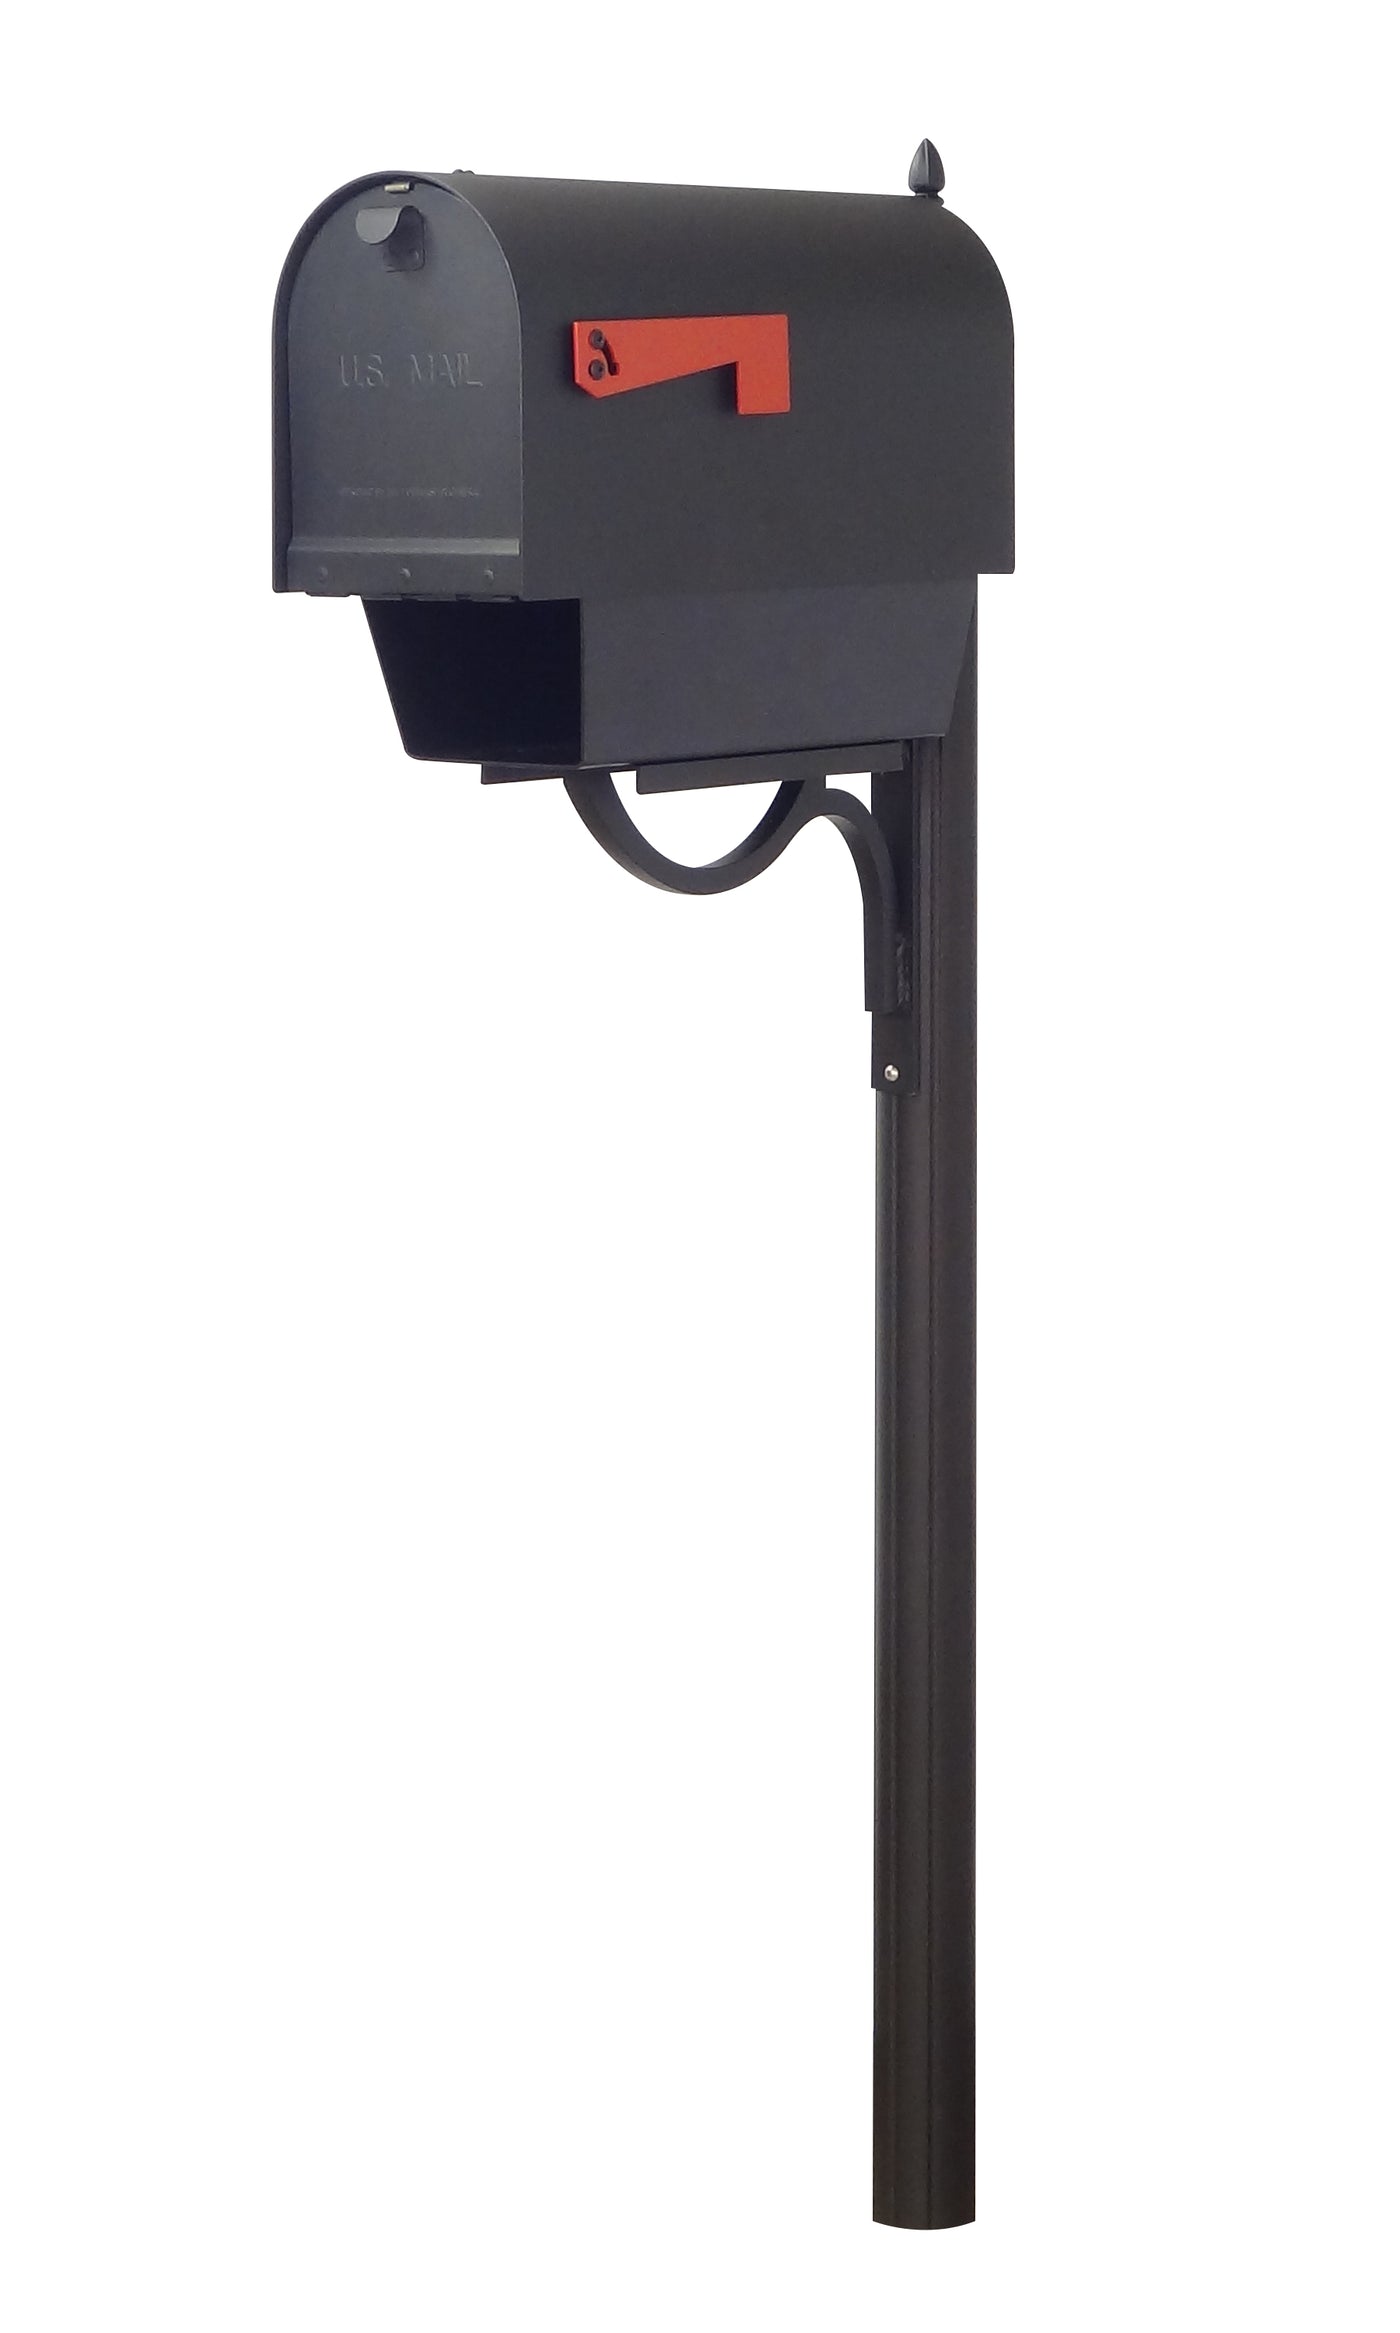 Titan Aluminum Curbside Mailbox with Paper Tube and Richland Mailbox Post